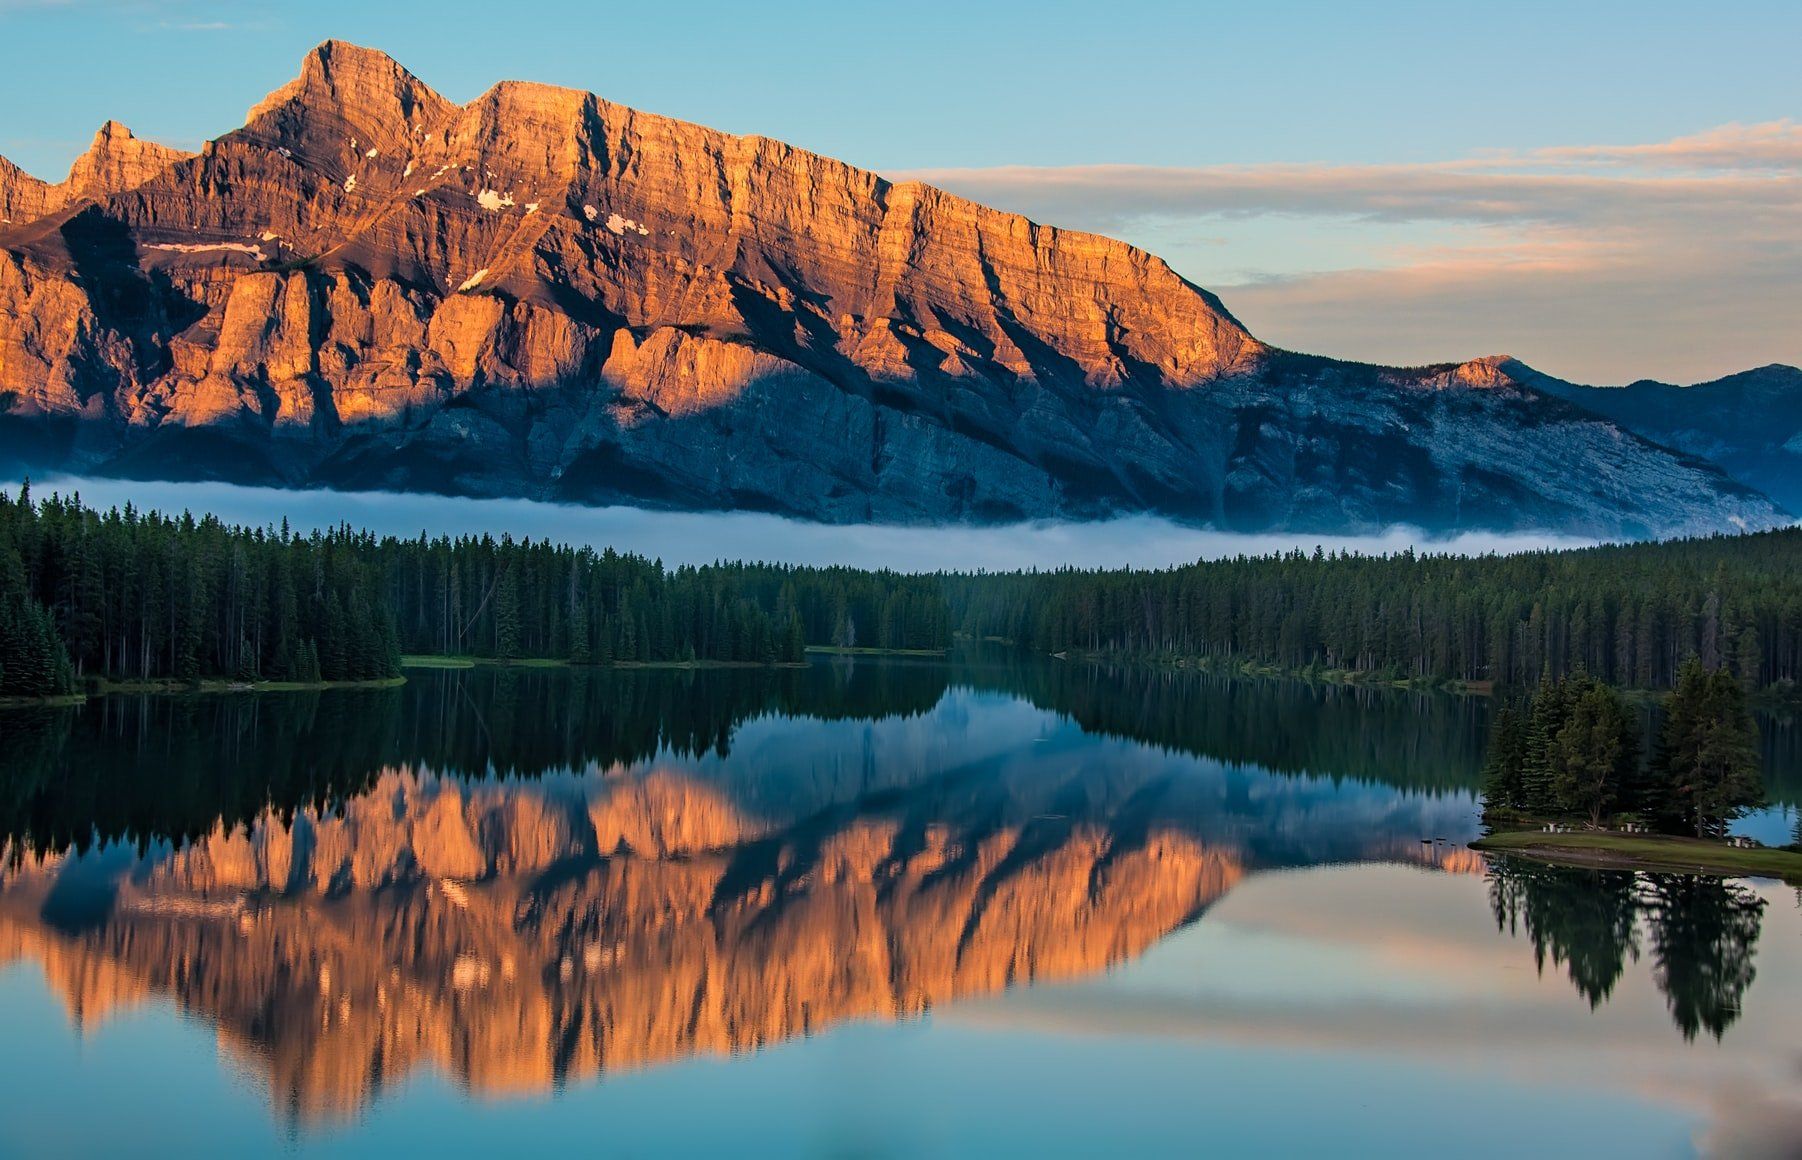 Mount Rundle reflected in Two Jack Lake in Banff National Park.